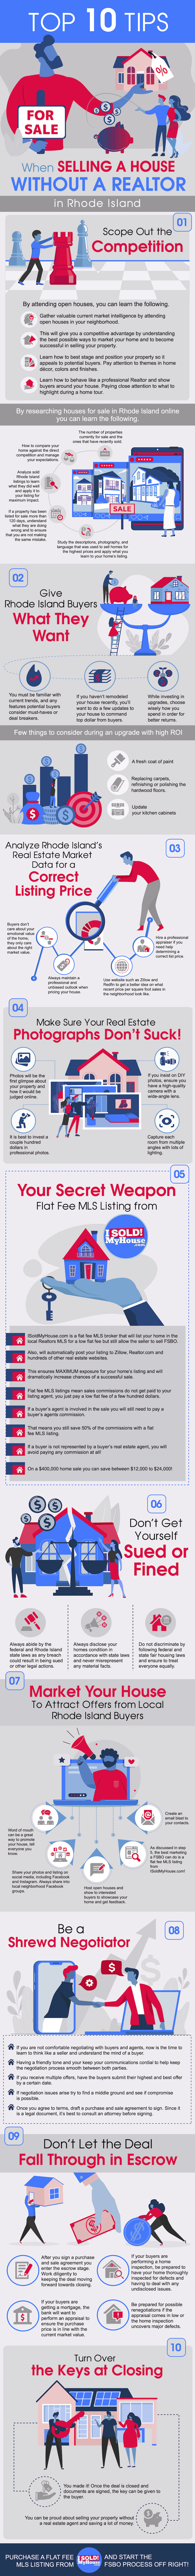 infographic of the 10 steps to sell a house in rhode island without an agent